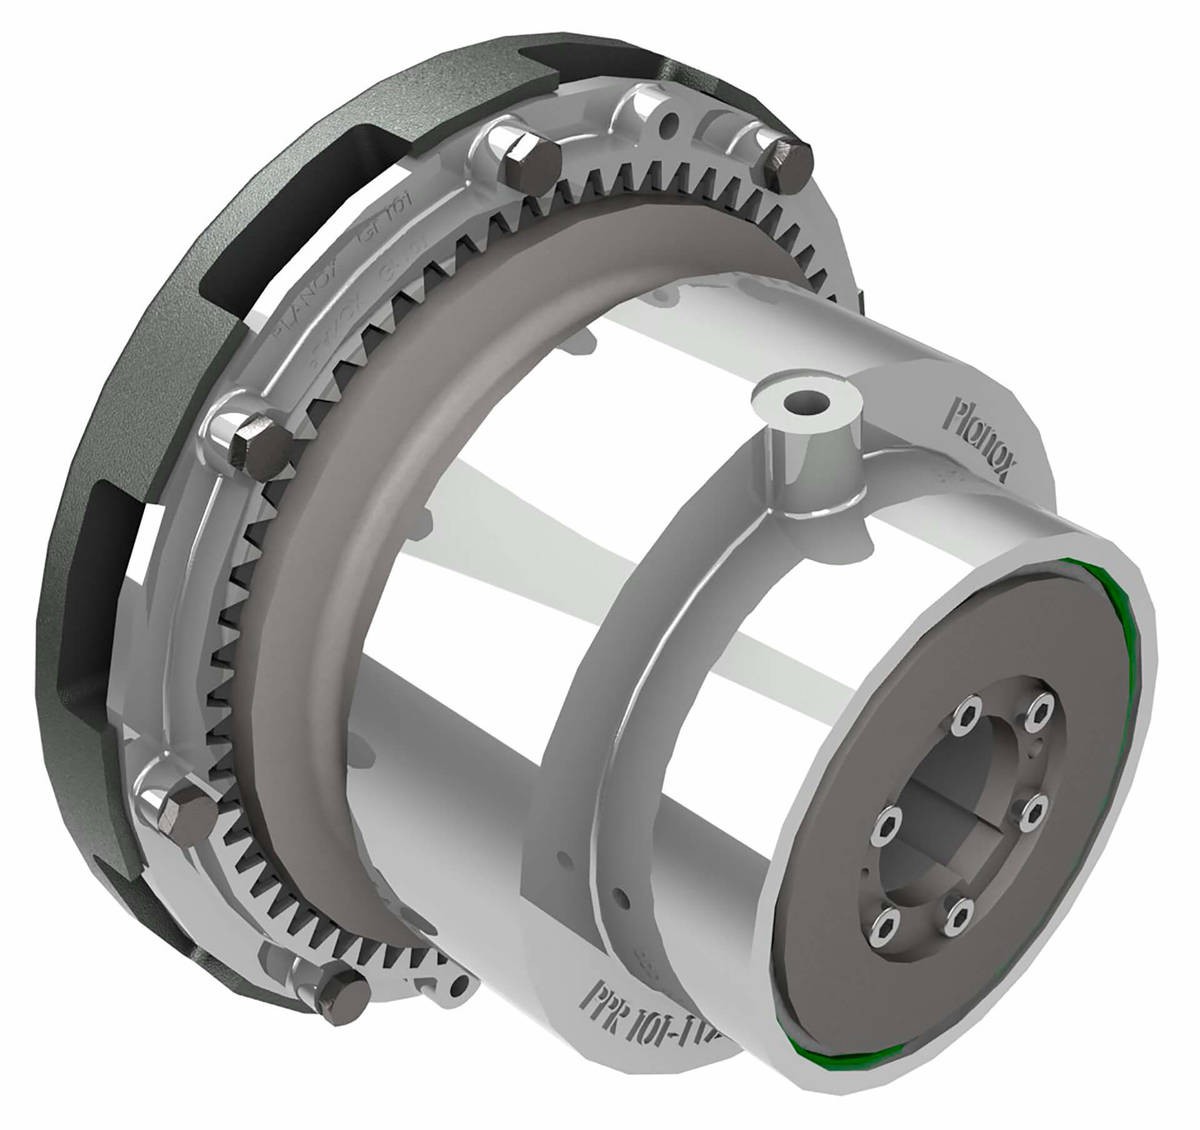 Desch Planox® PPR switched on pneumatically, radial air supply  Multi Plate Friction Clutch Image